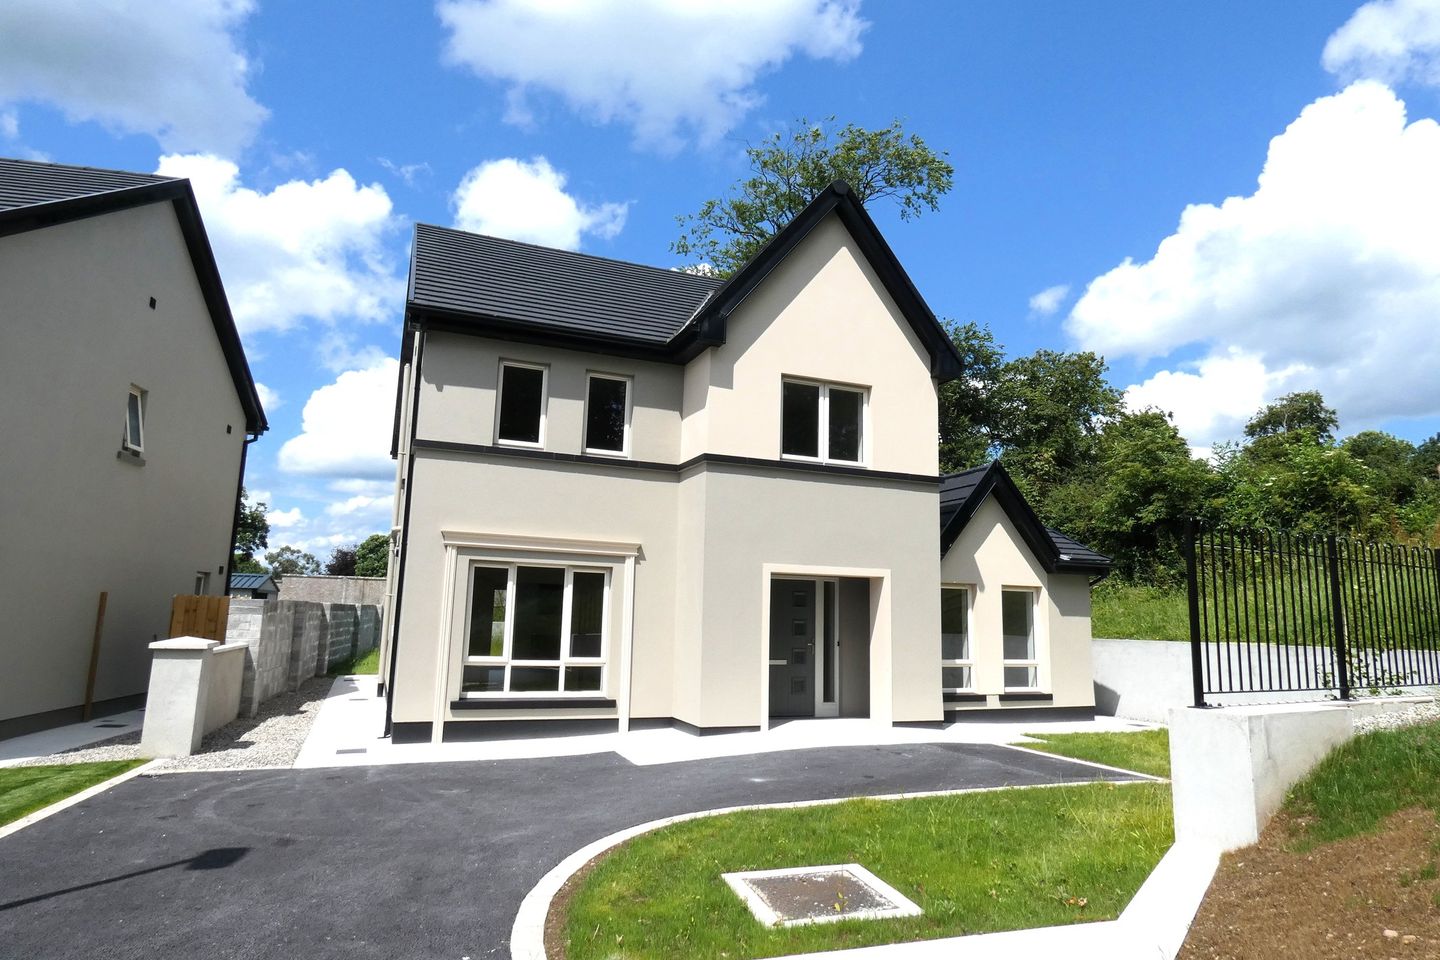 46 Radharc Doire, Smithstown, Shannon, Co. Clare, V14RY79